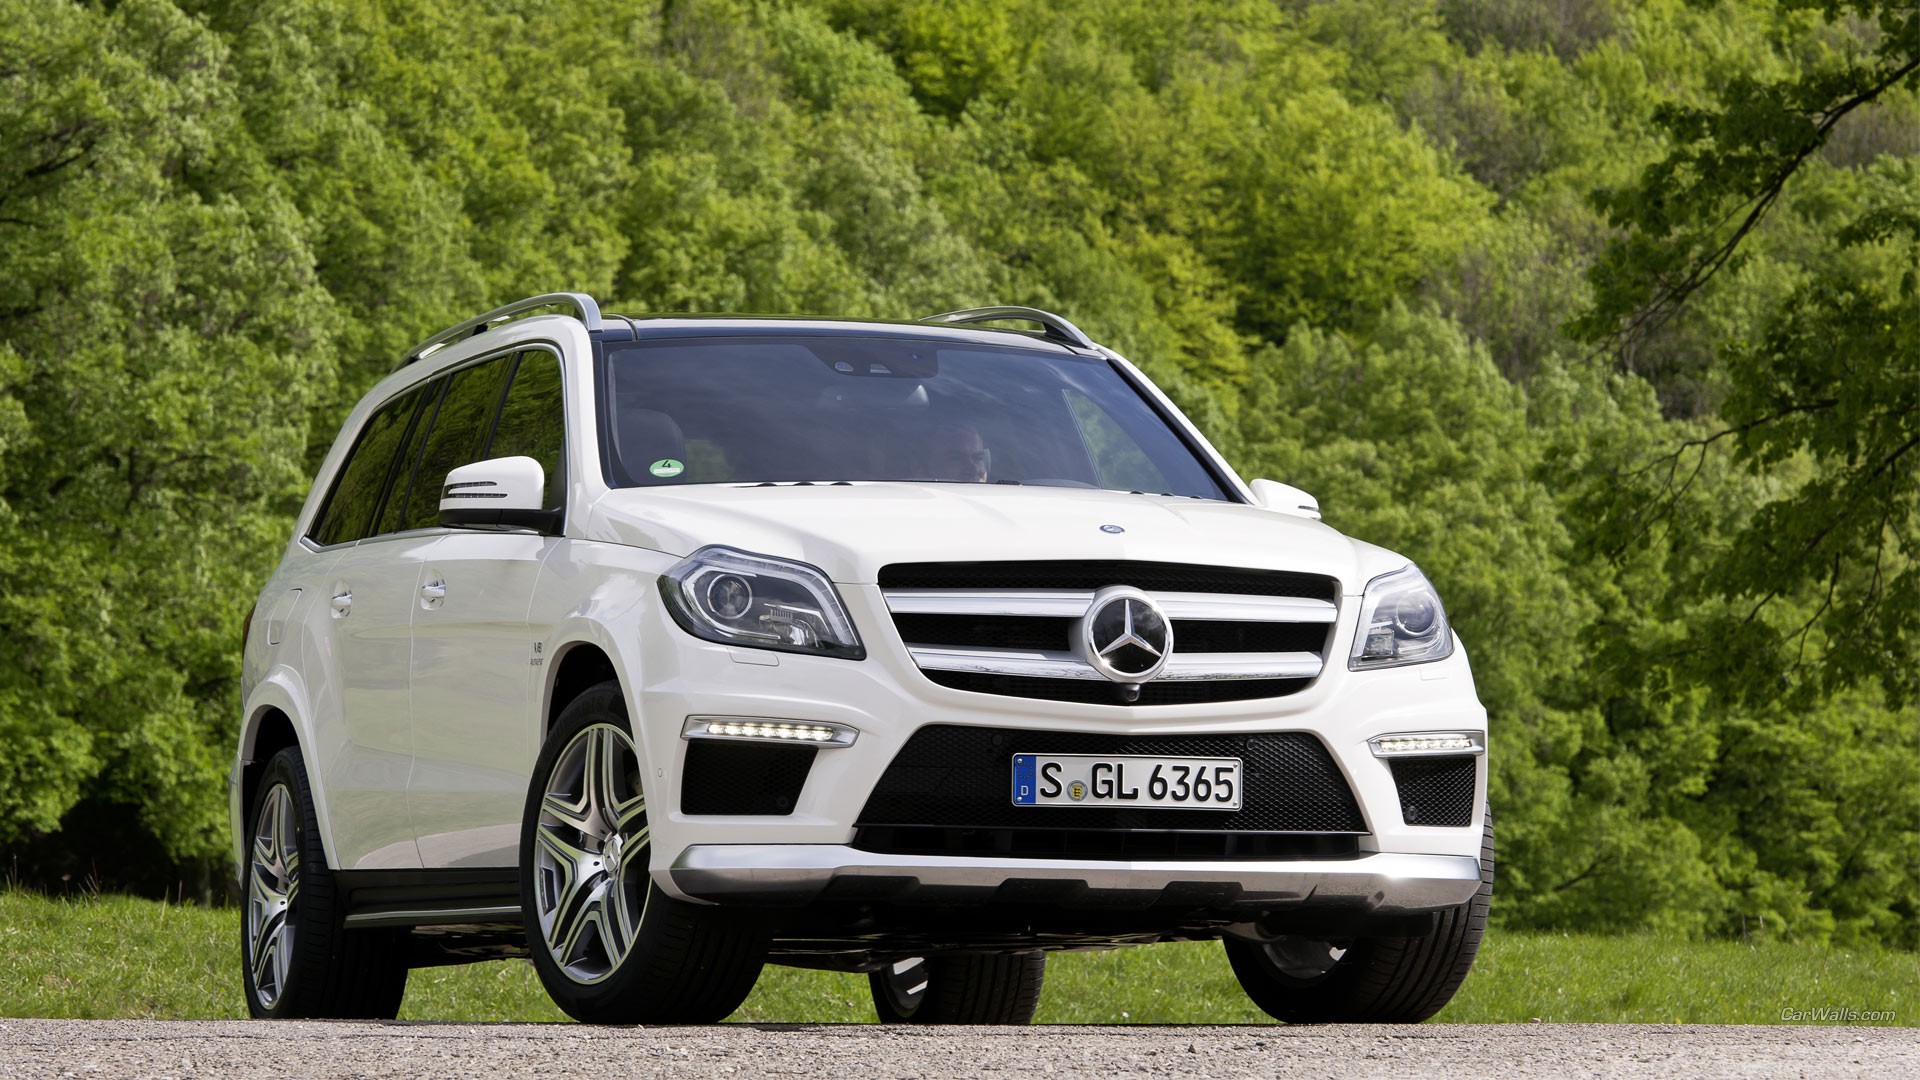 General 1920x1080 car vehicle white cars numbers Mercedes-Benz German cars SUV